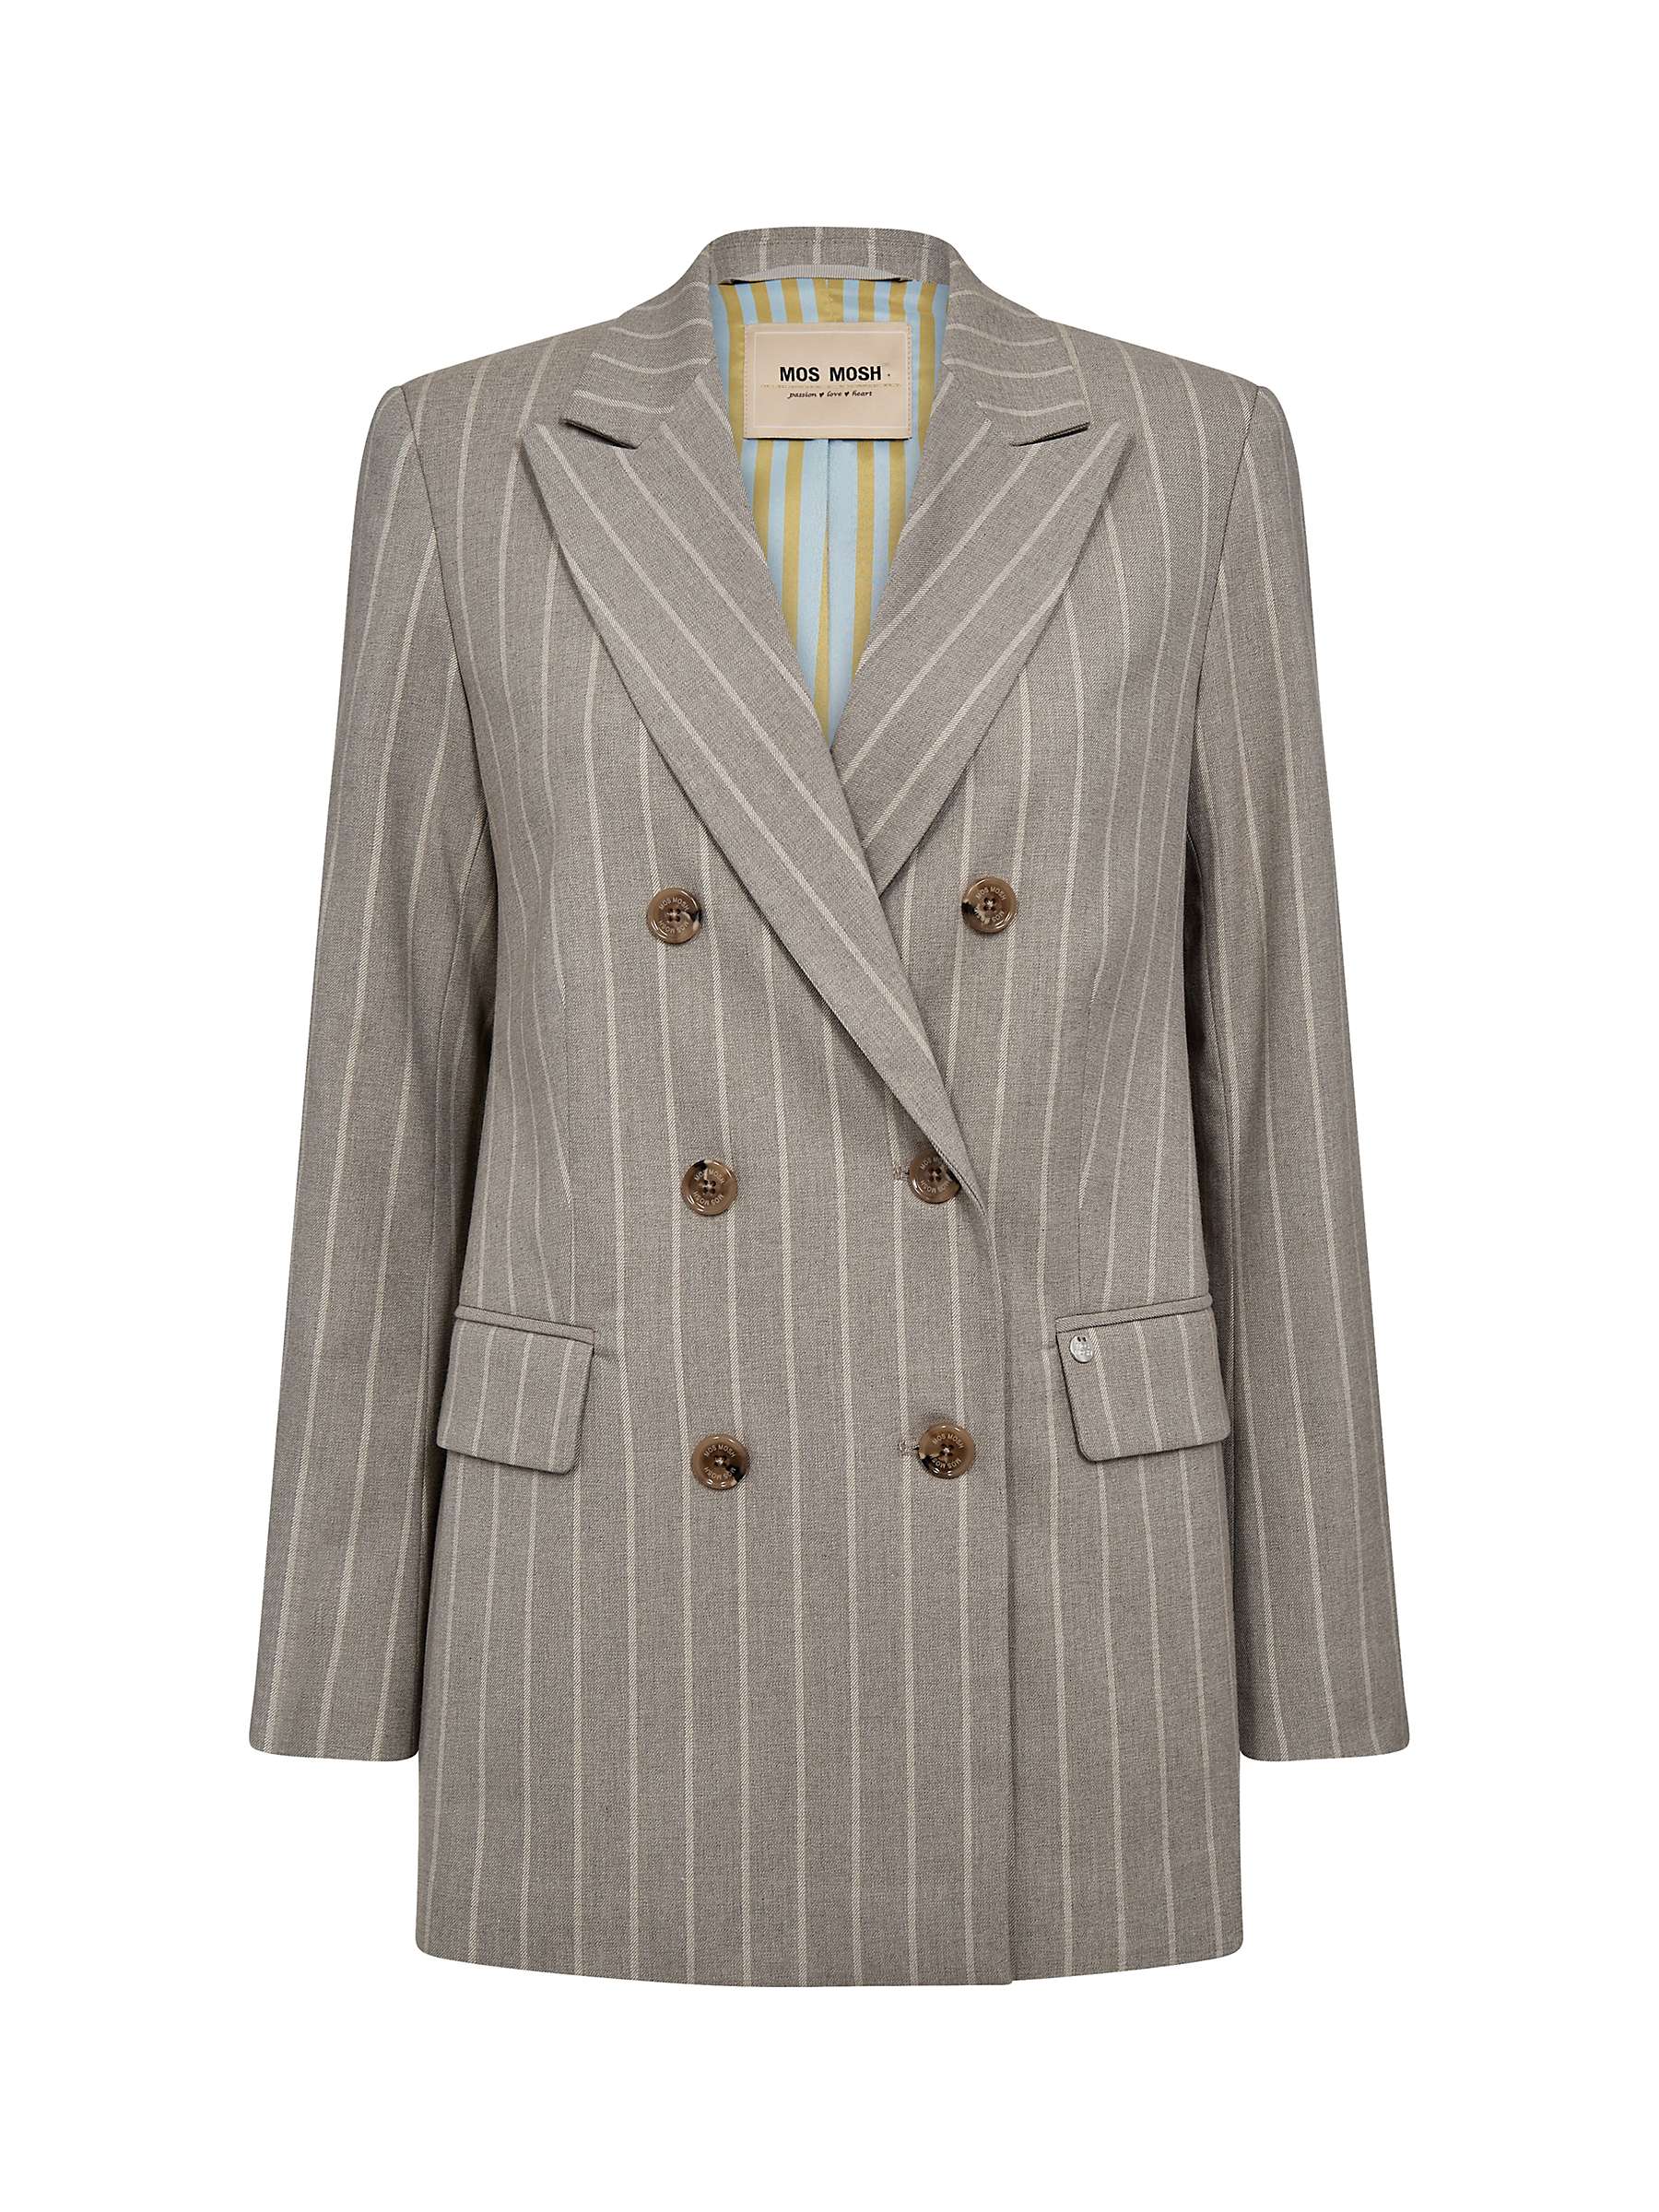 Buy MOS MOSH Milla Soft Stripe Double Breasted Blazer, Roasted Cashew Online at johnlewis.com